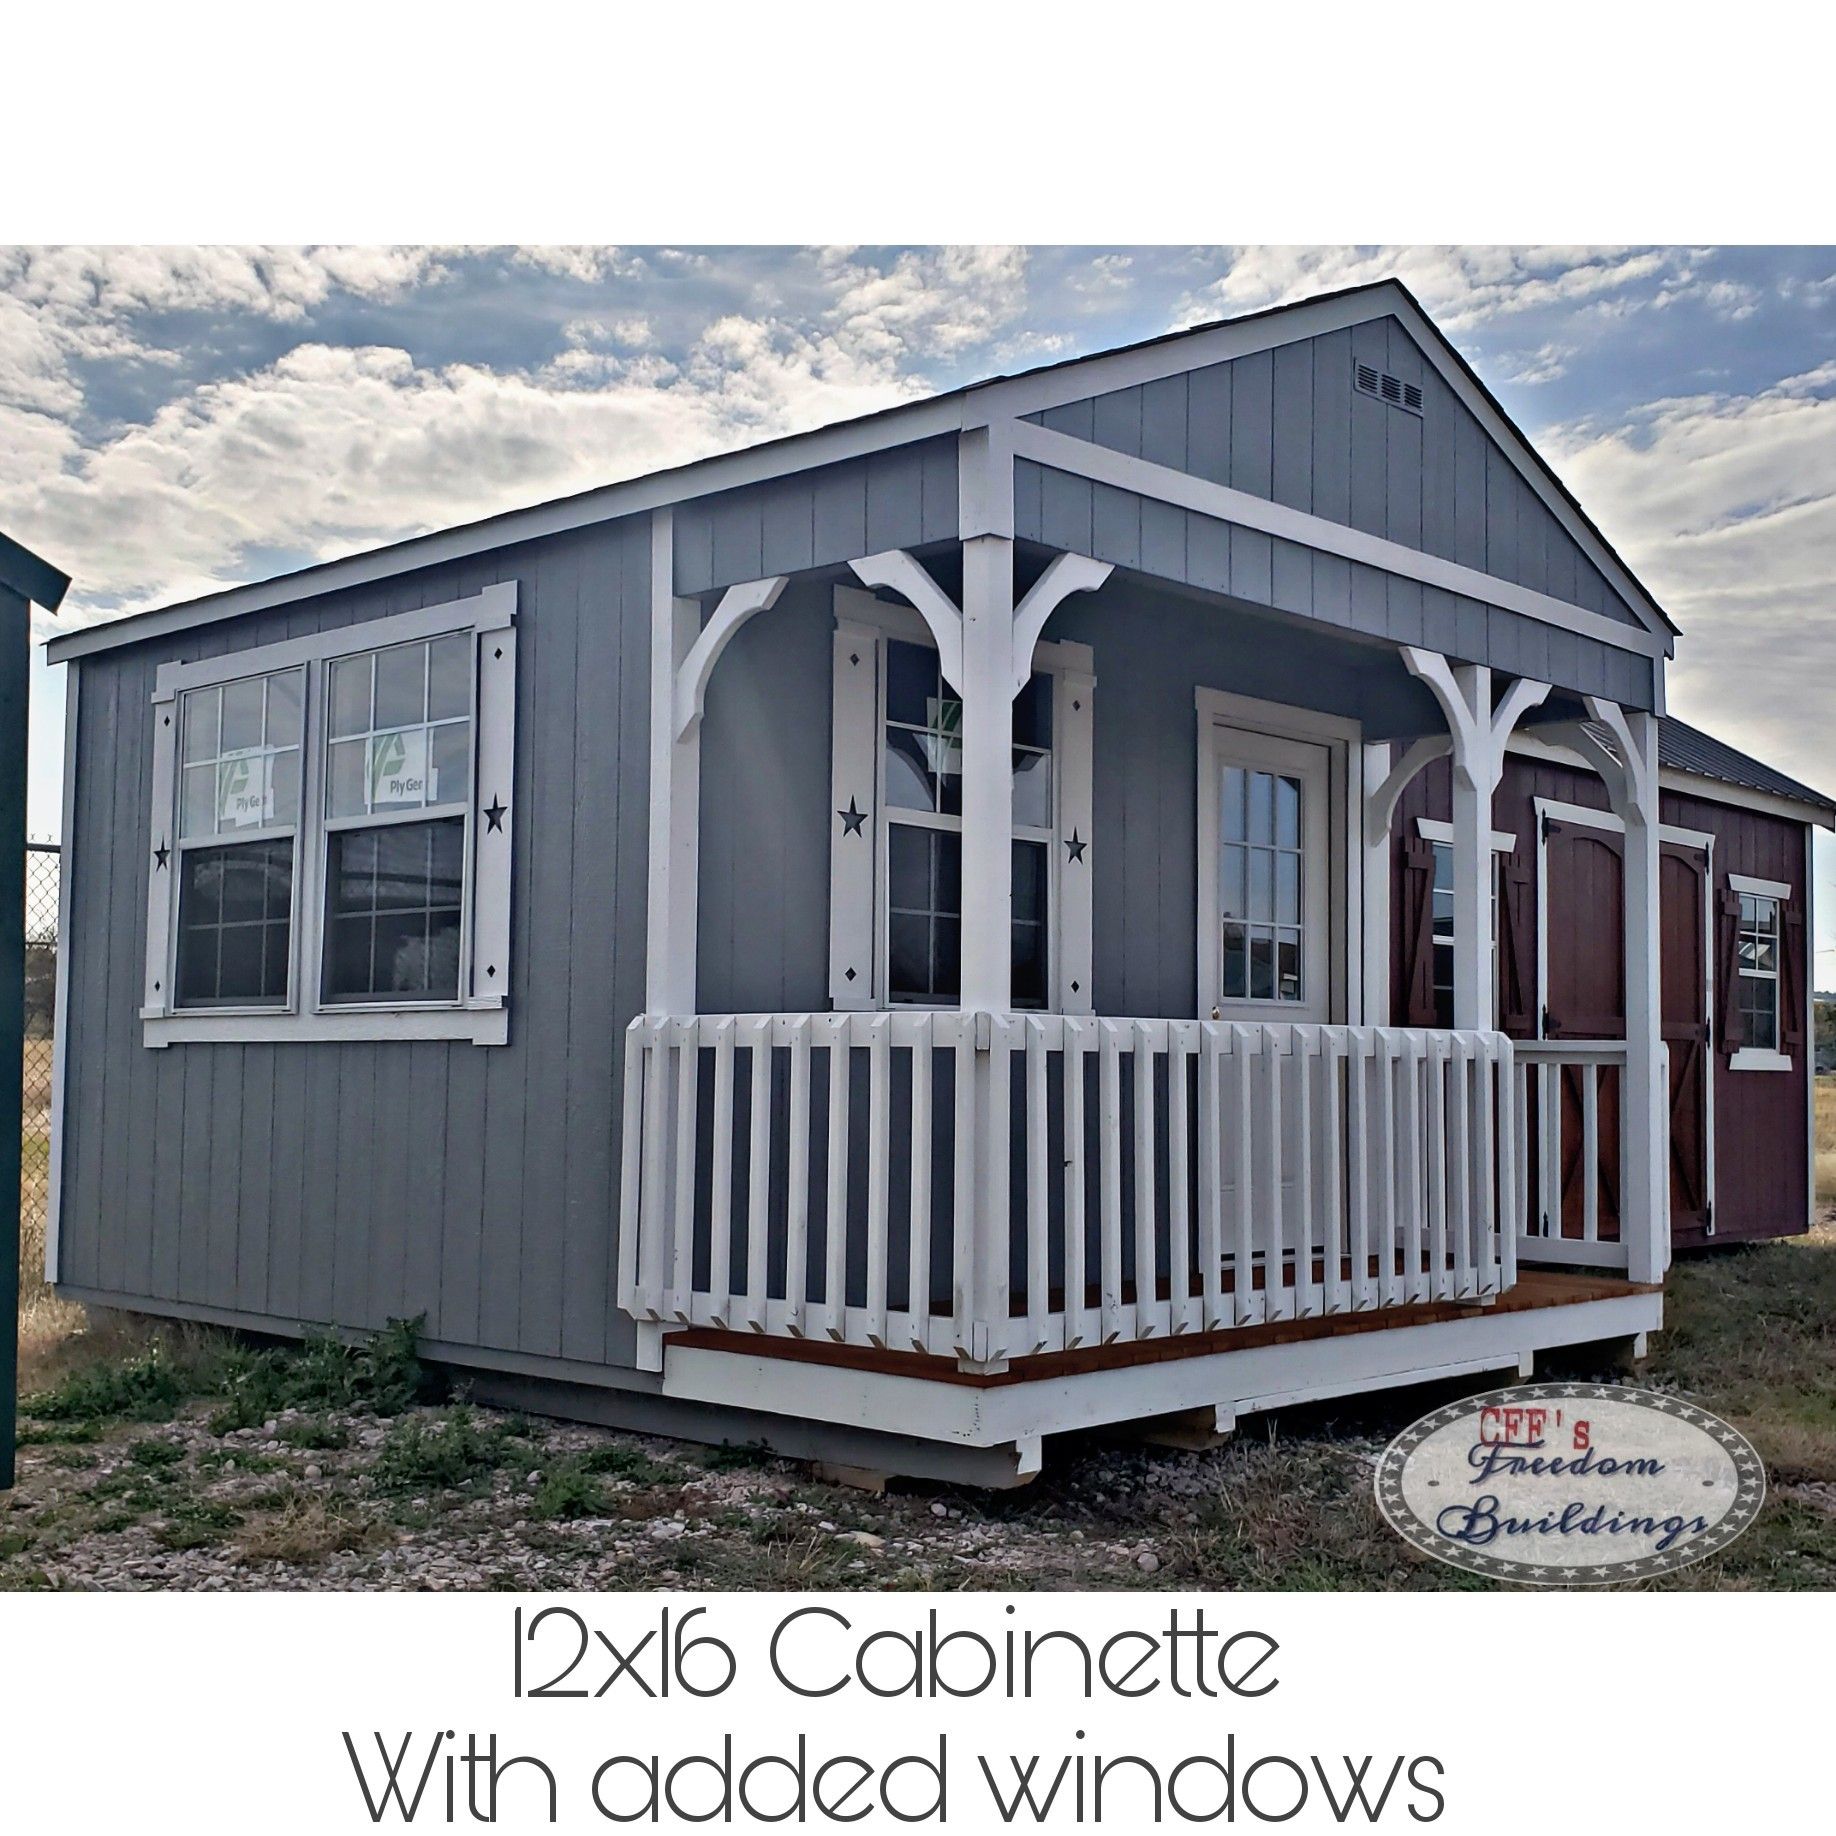 SALE: New cabins and sheds, Purchase or Rent to own-no credit check. Free delivery!!!